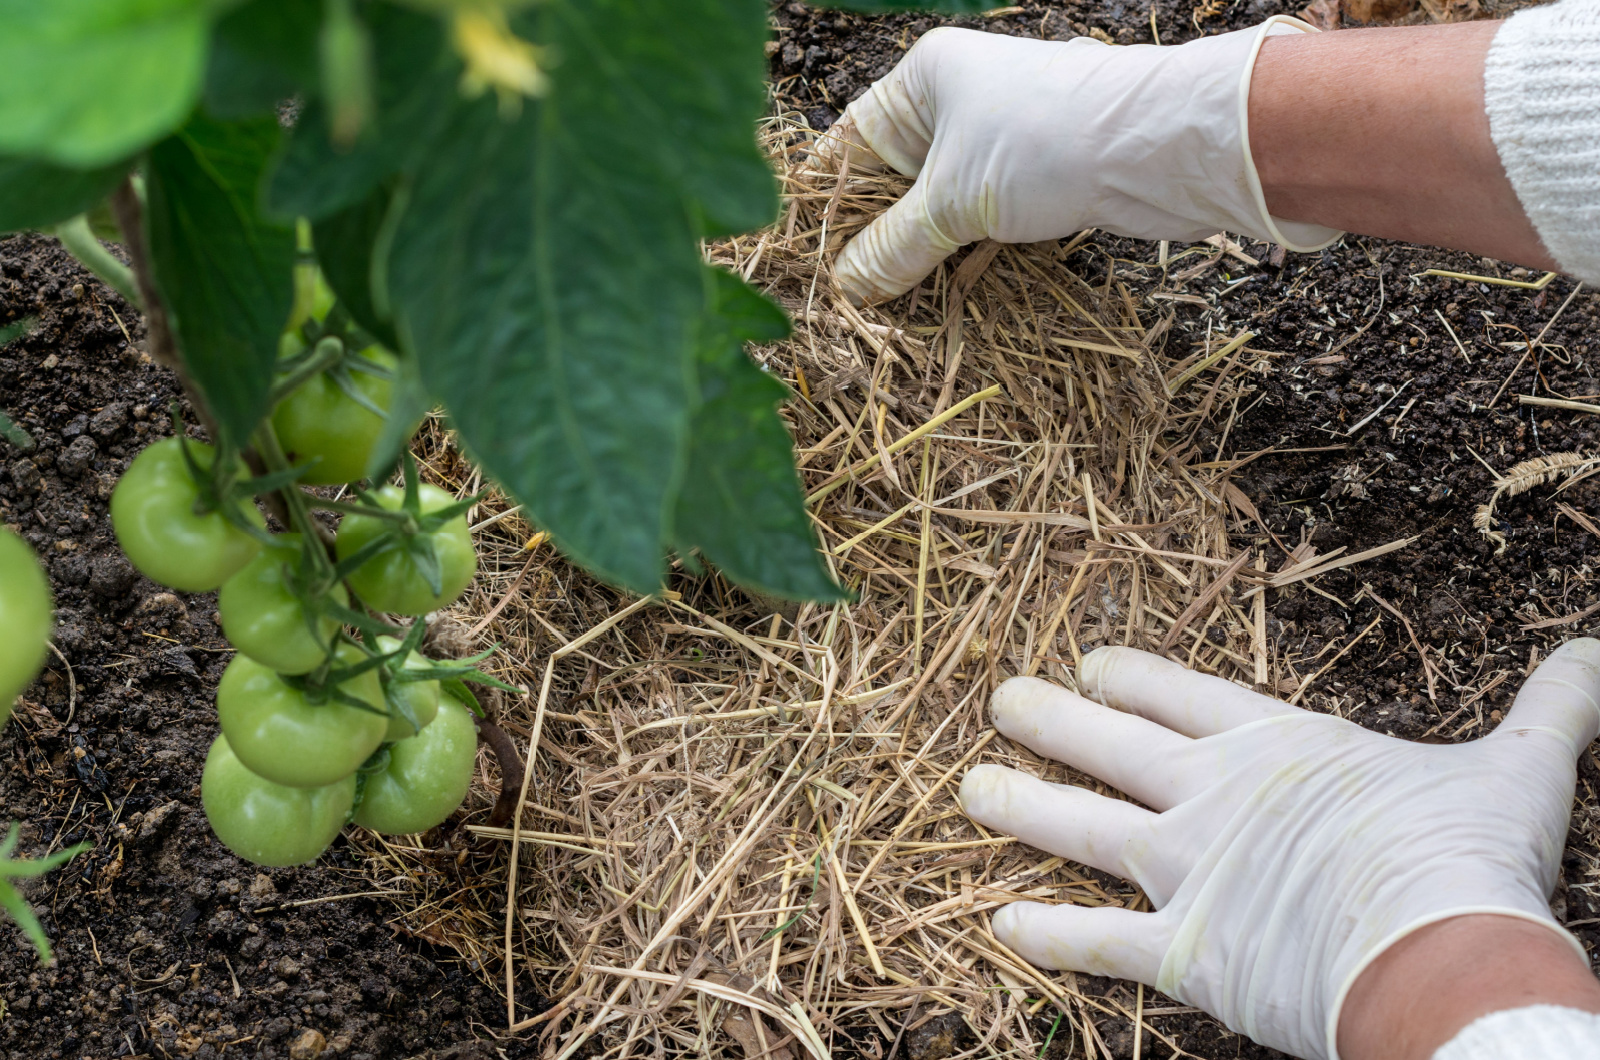 Woman is placing natural mulch around the stems of tomato